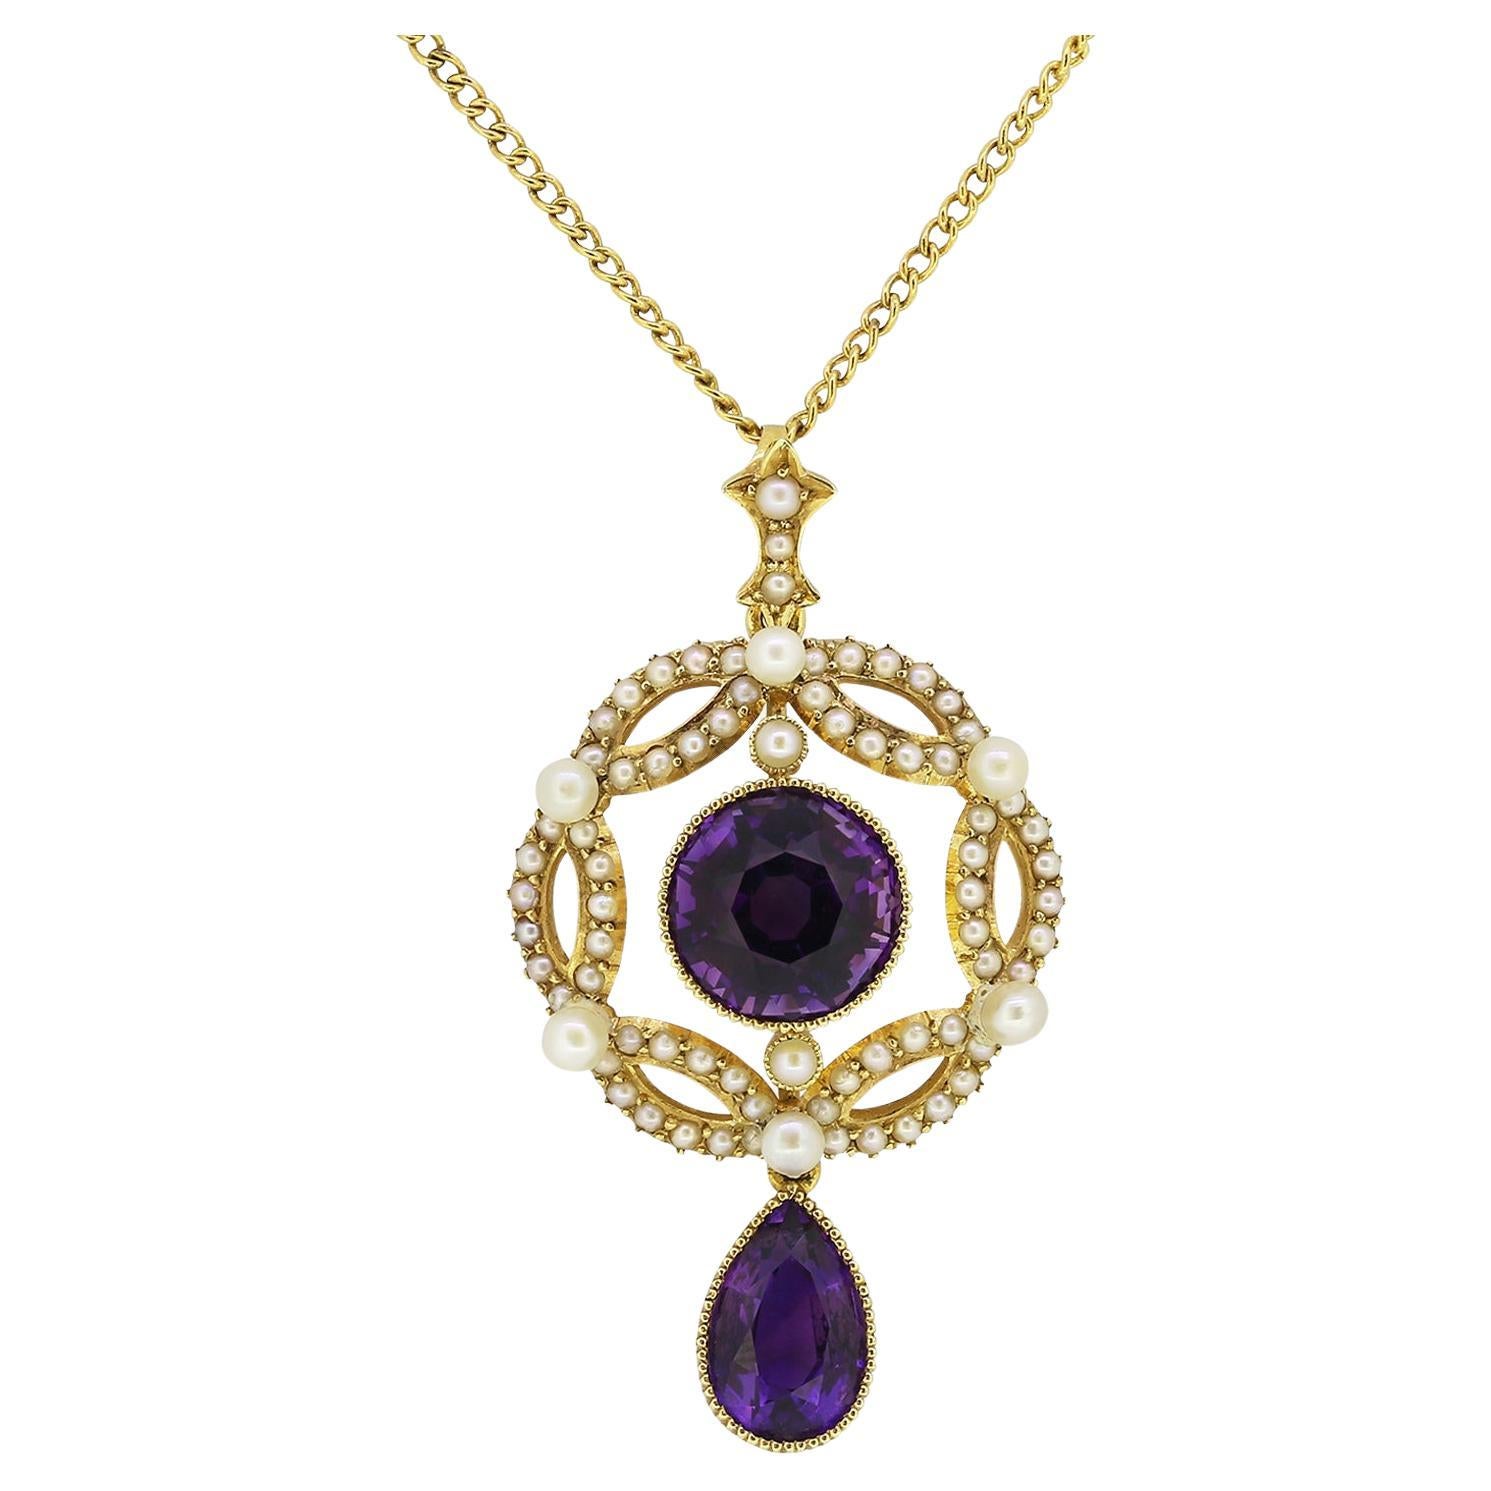 Victorian Amethyst and Pearl Pendant Necklace